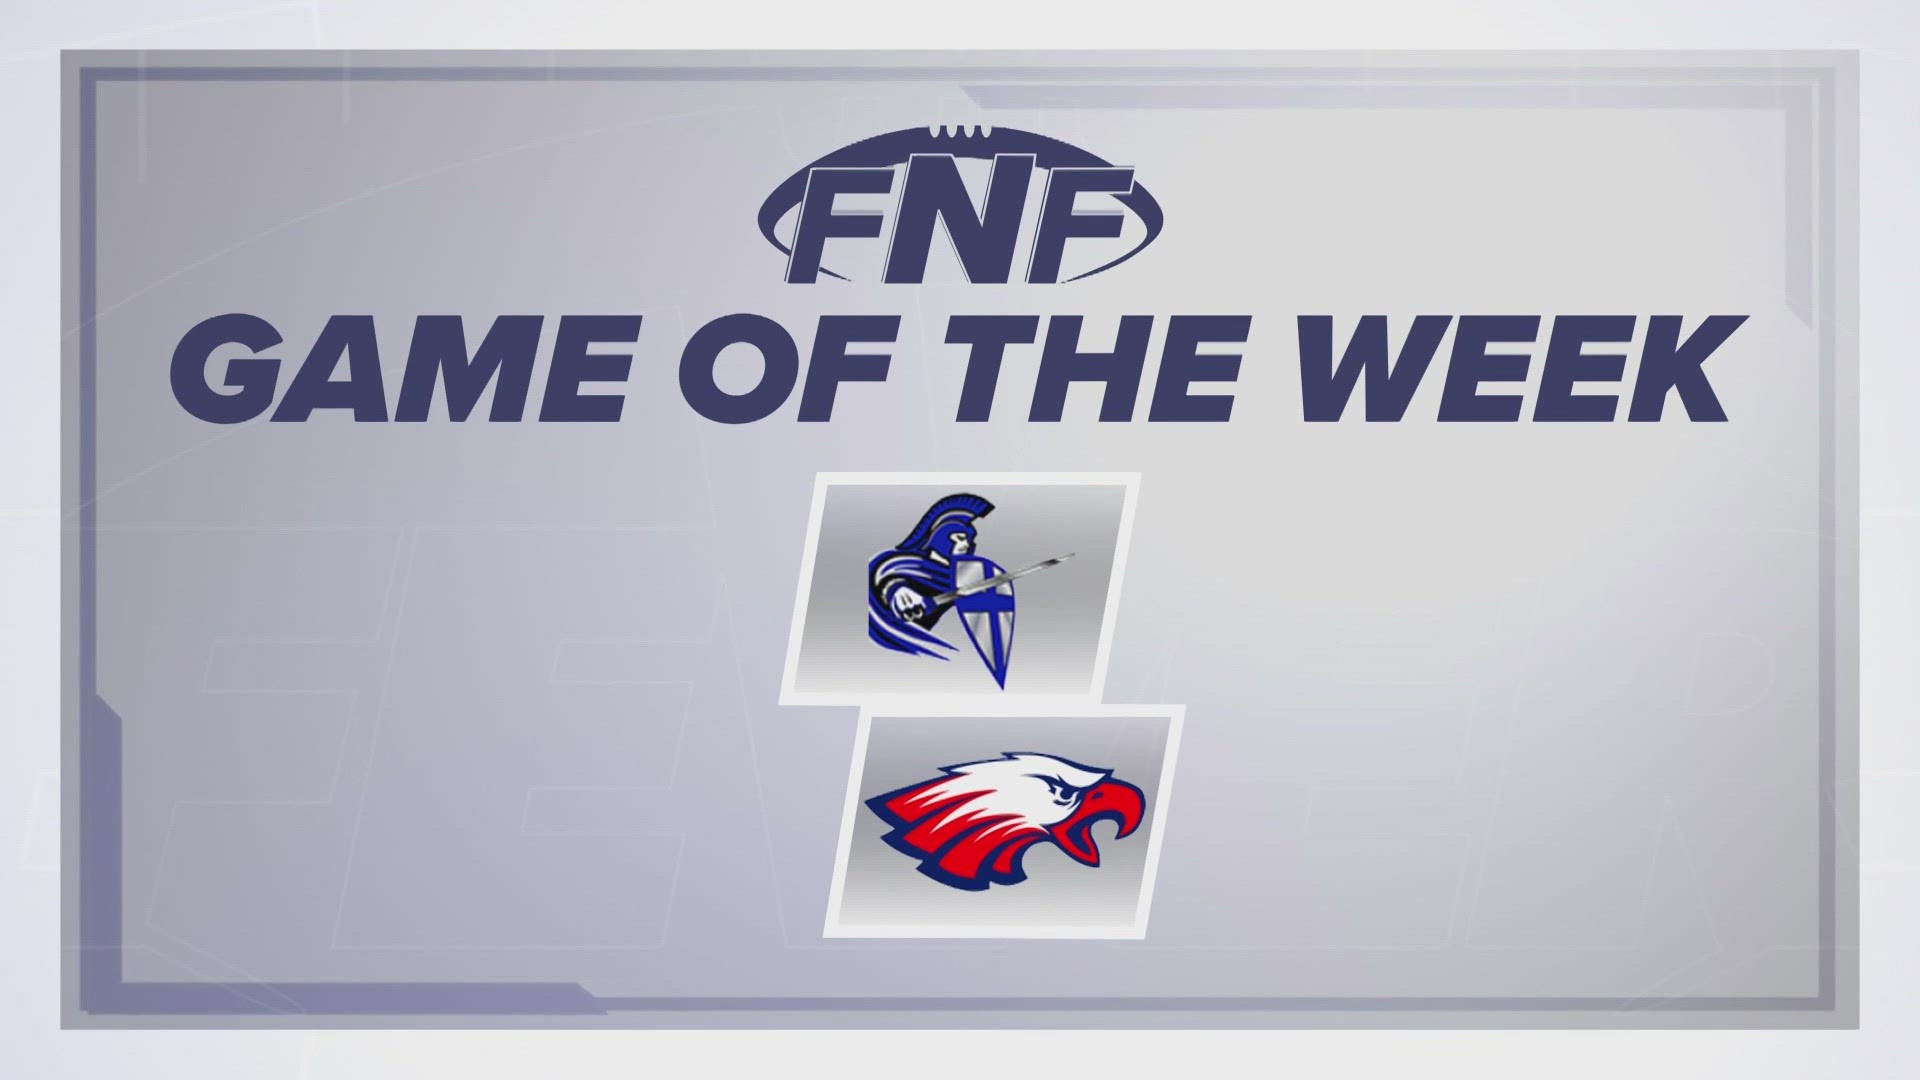 It was the best week of voting so far this season, but which game earned the title of Friday Night Fever's Week 4 Game of the Week? Find out here!